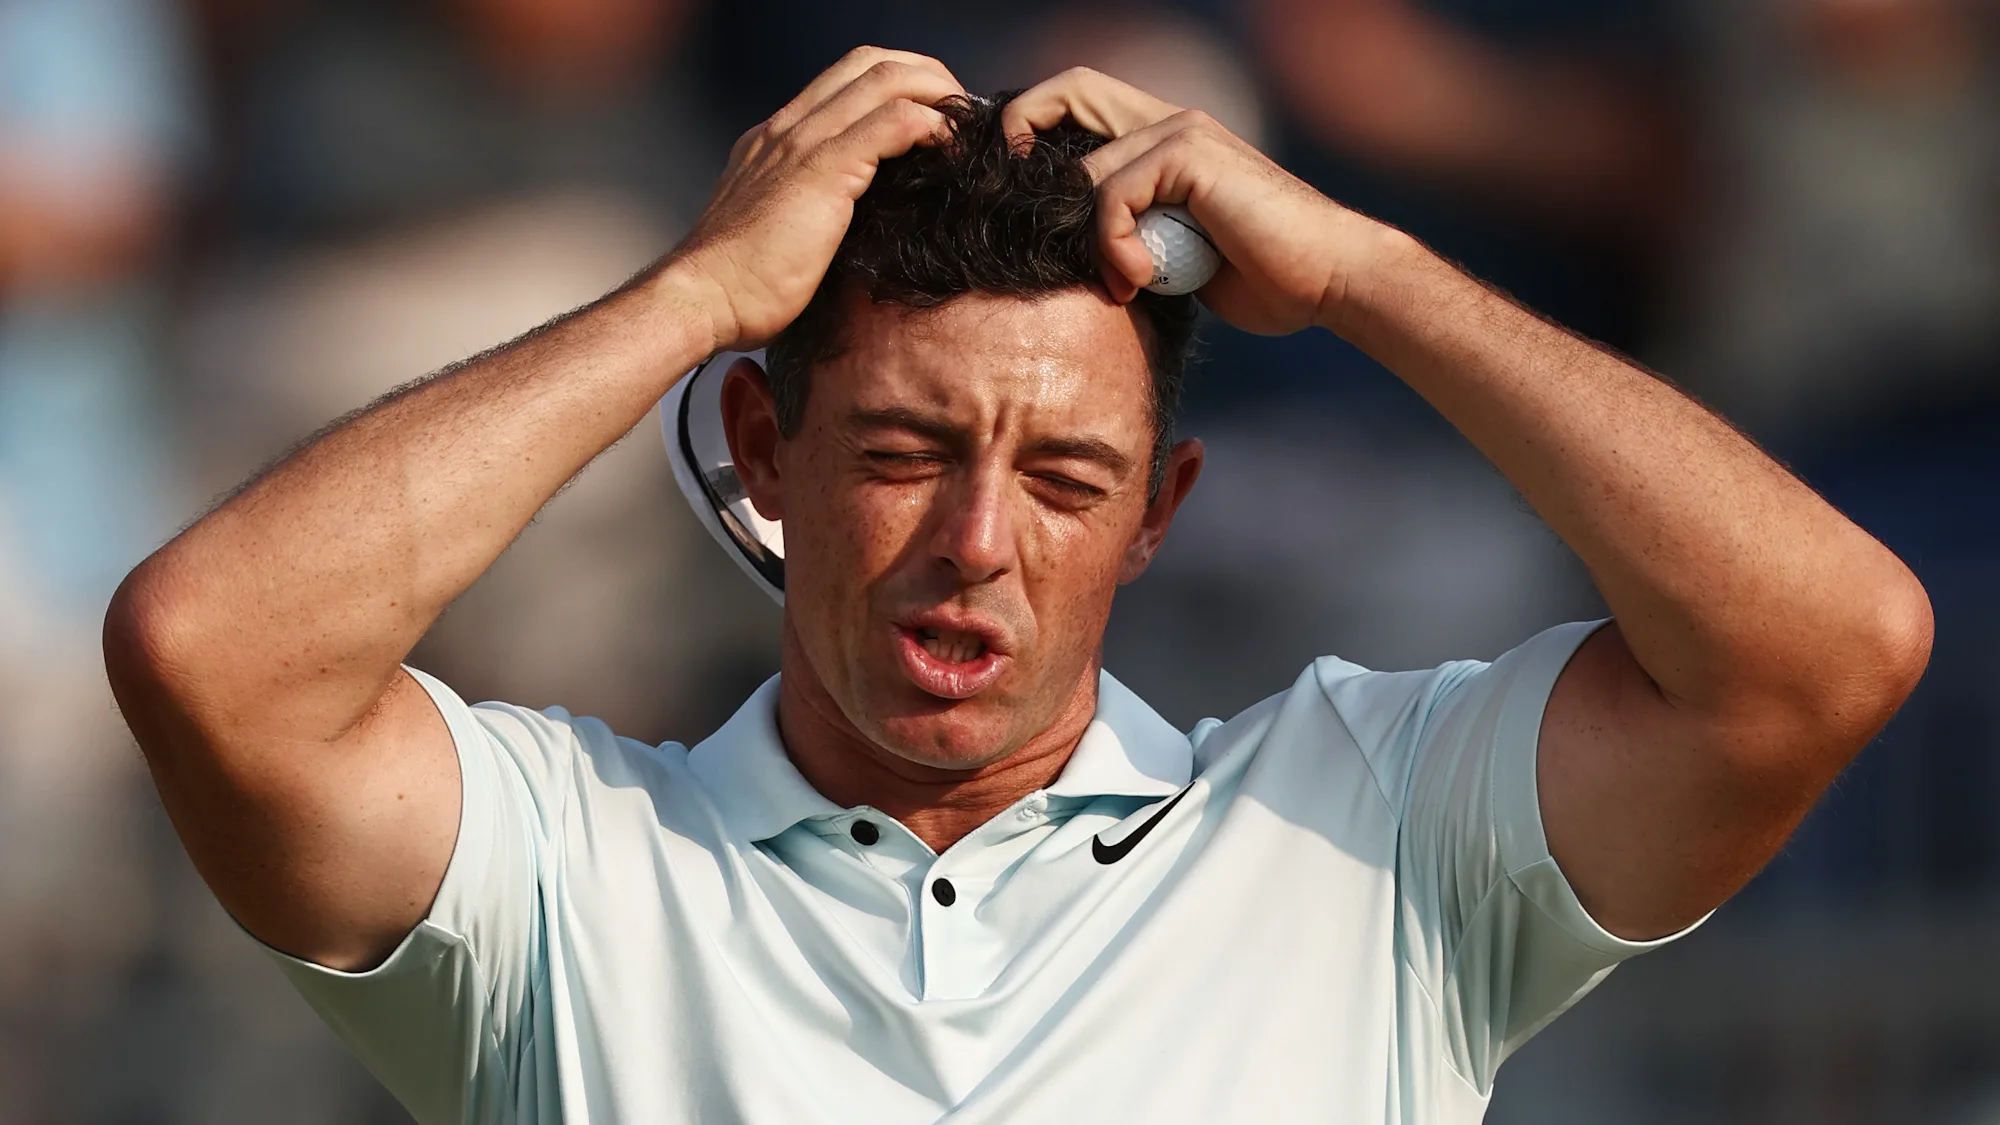 'Going To Haunt Him For The Rest Of His Life’ - Rory McIlroy’s Major Drought Continues After US Open Agony